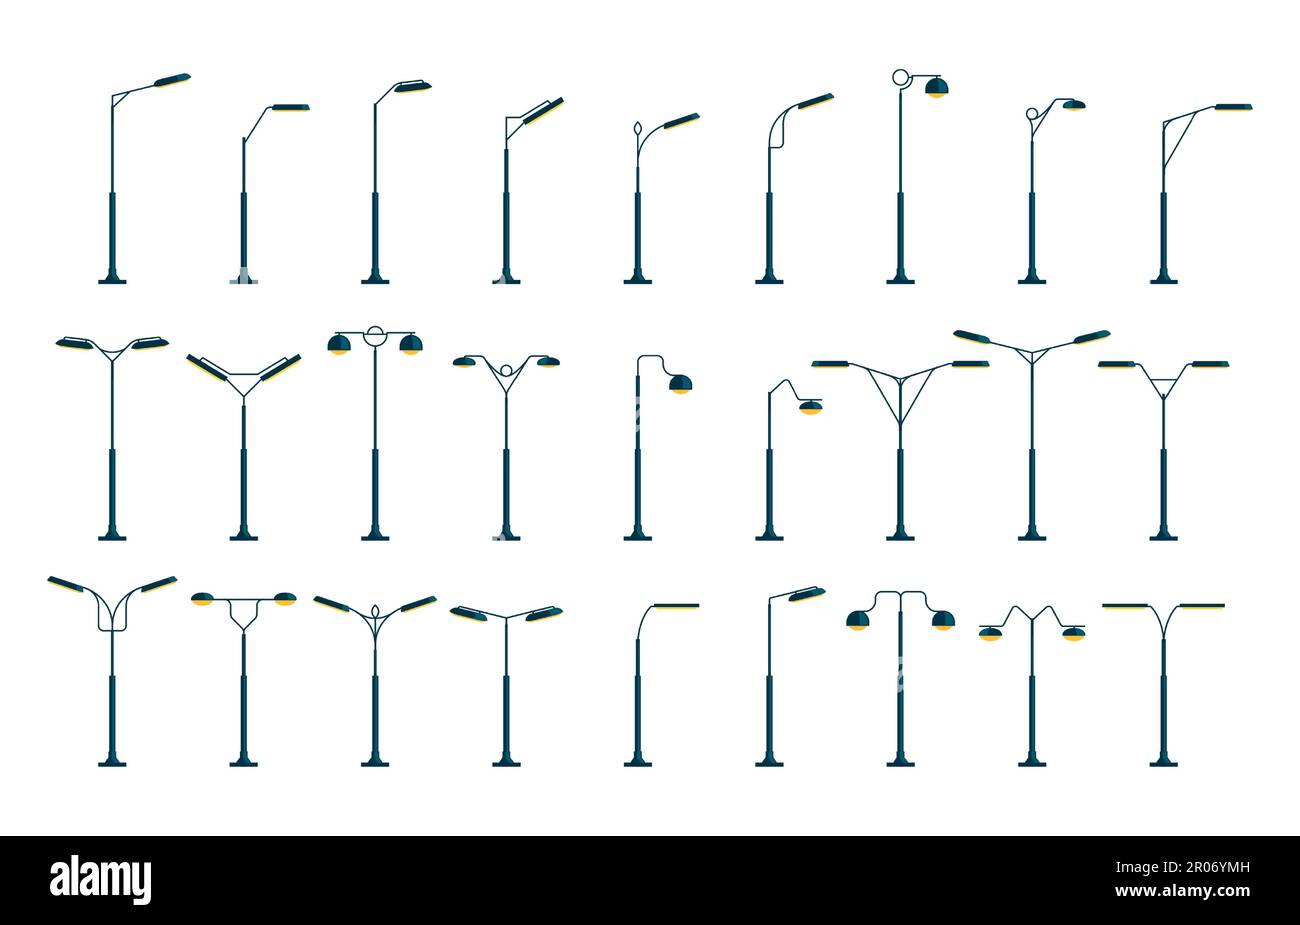 Premium Vector  Collection of different street lights and lanterns city  lamp post and lamp pole set in flat design